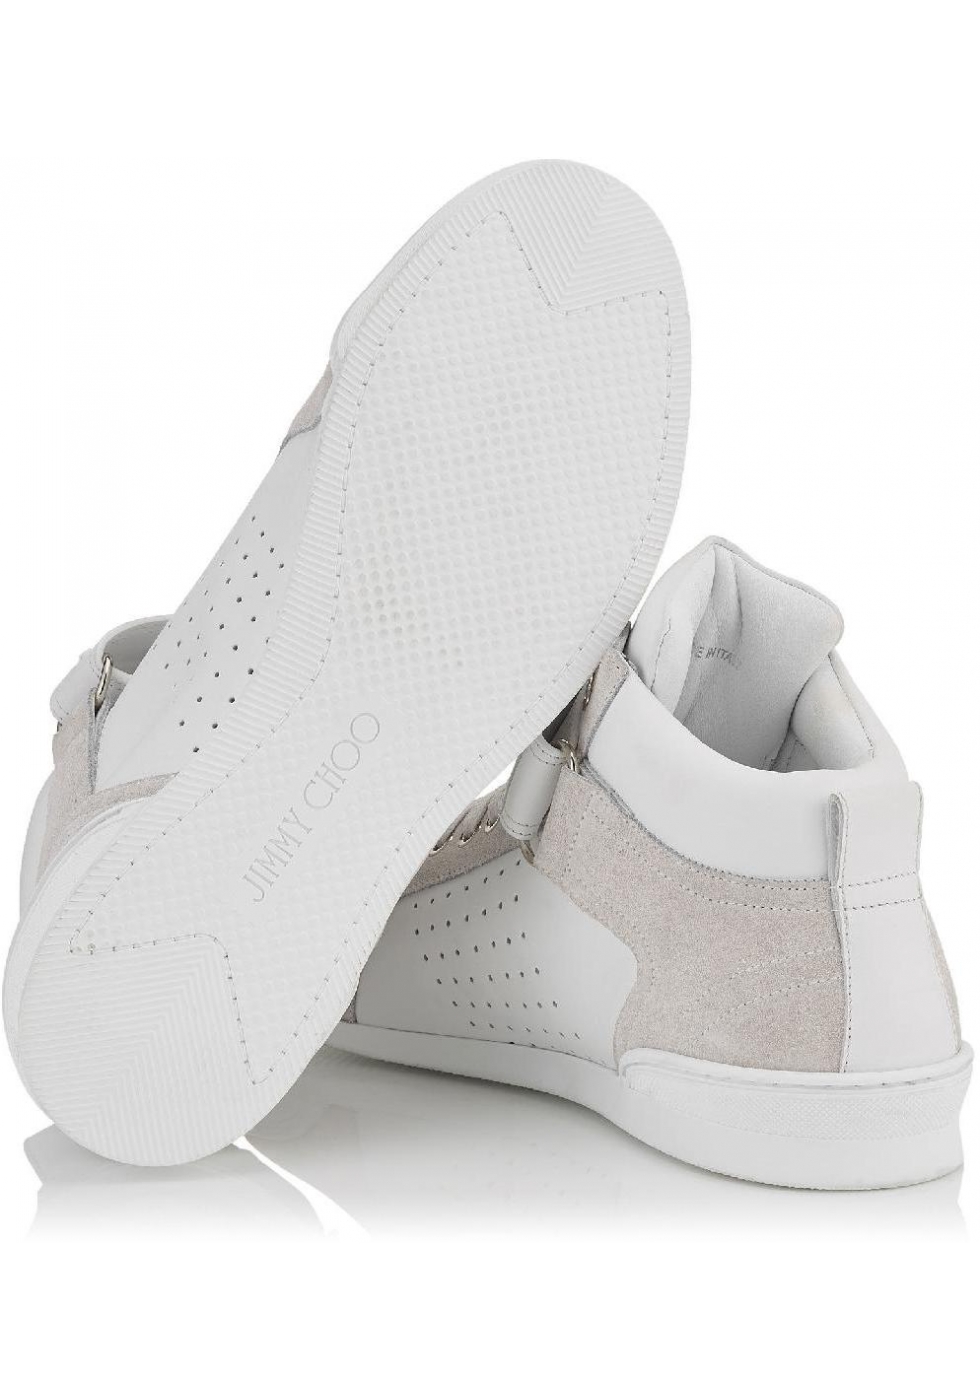 Jimmy Choo men's high sneakers in white calf leather - Italian Boutique